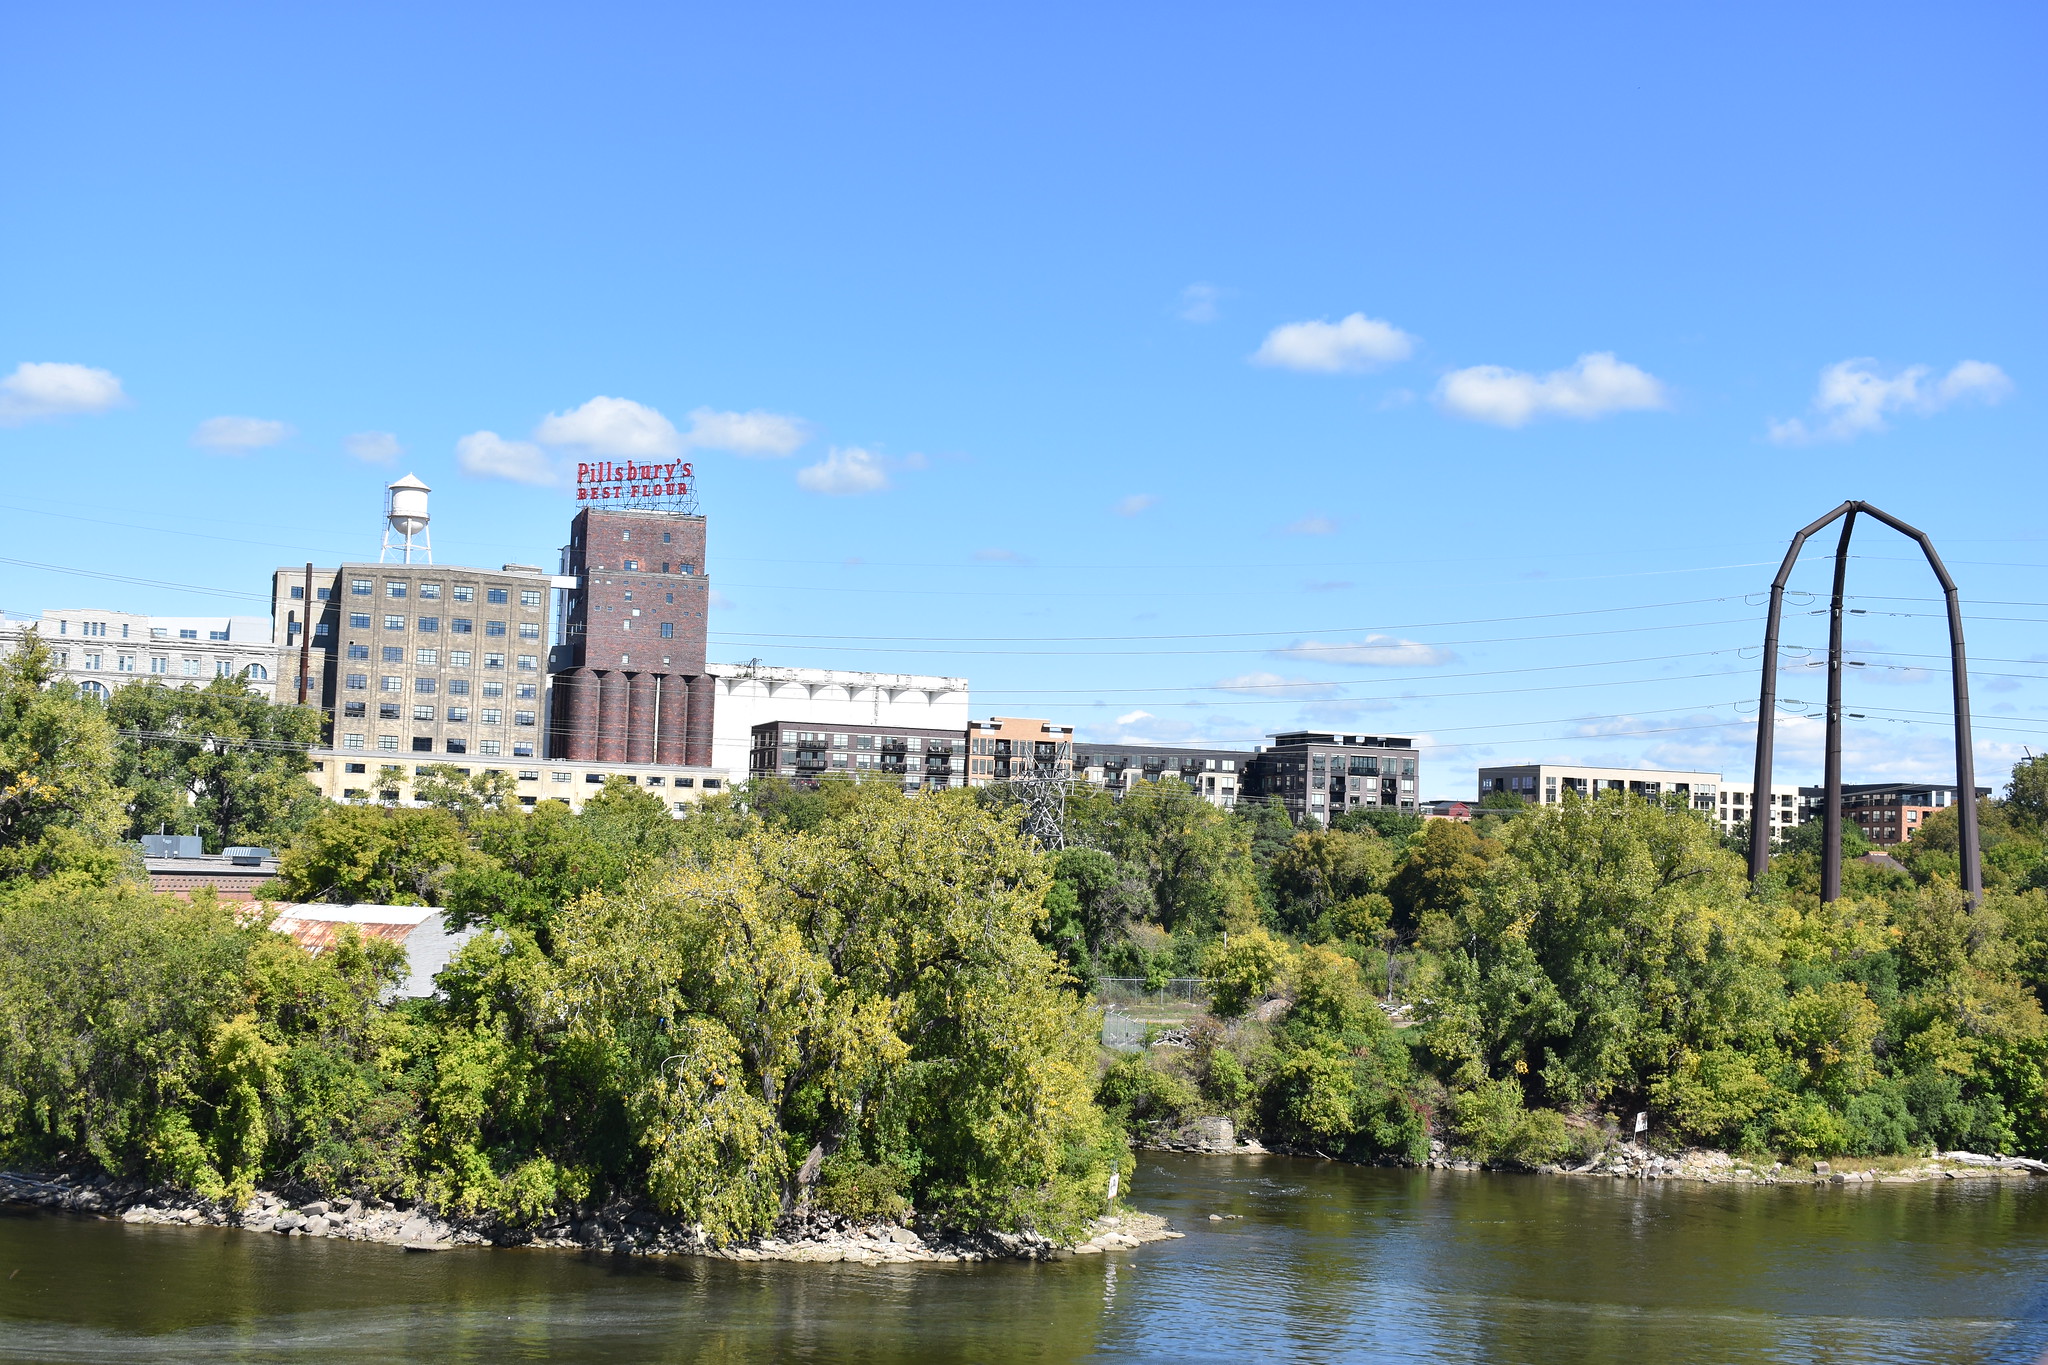 Mississippi riverfront in Minneapolis with buildings, bridge and Pillsbury Flour sign